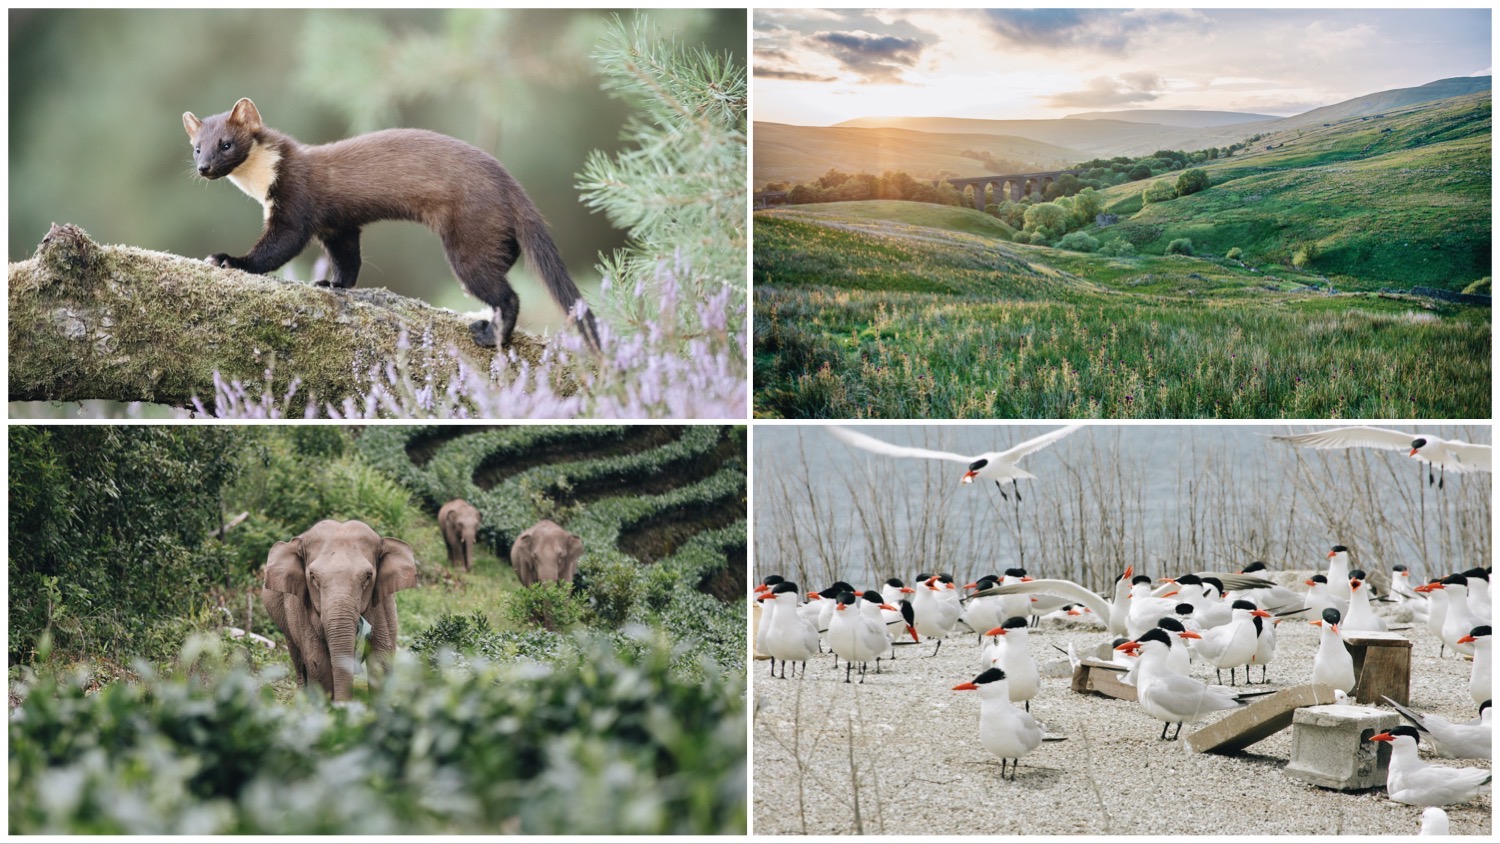 Photo grid featuring four of this week's stories. Clockwise from top left: A British pine marten, rolling English hills, China's roaming elephants, and Canadian Common Terns.